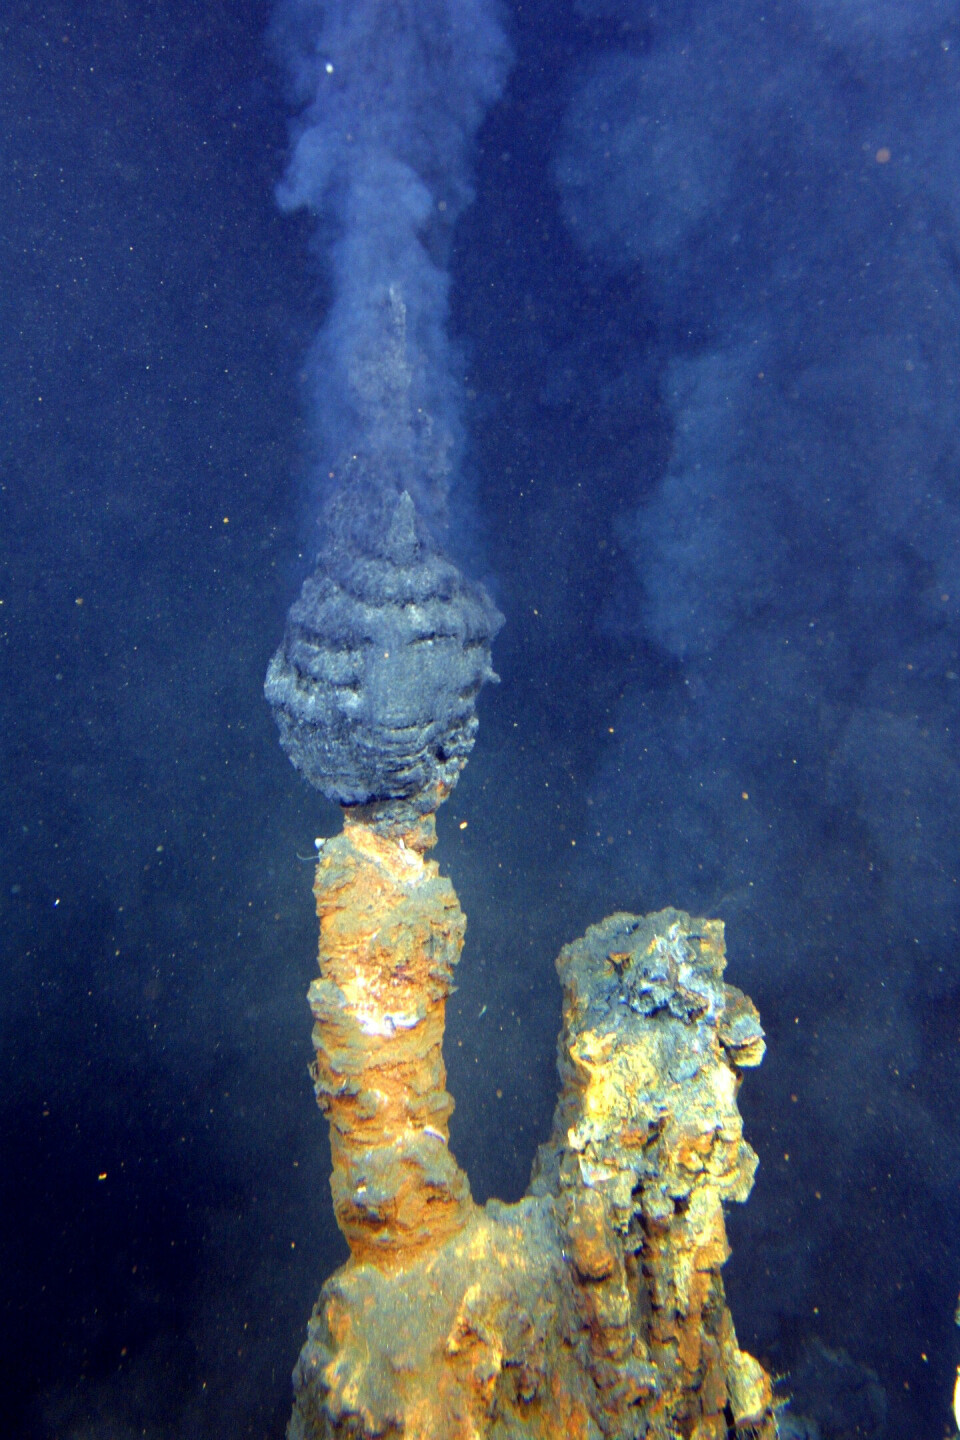 A hydrothermal vent at the bottom of the sea.